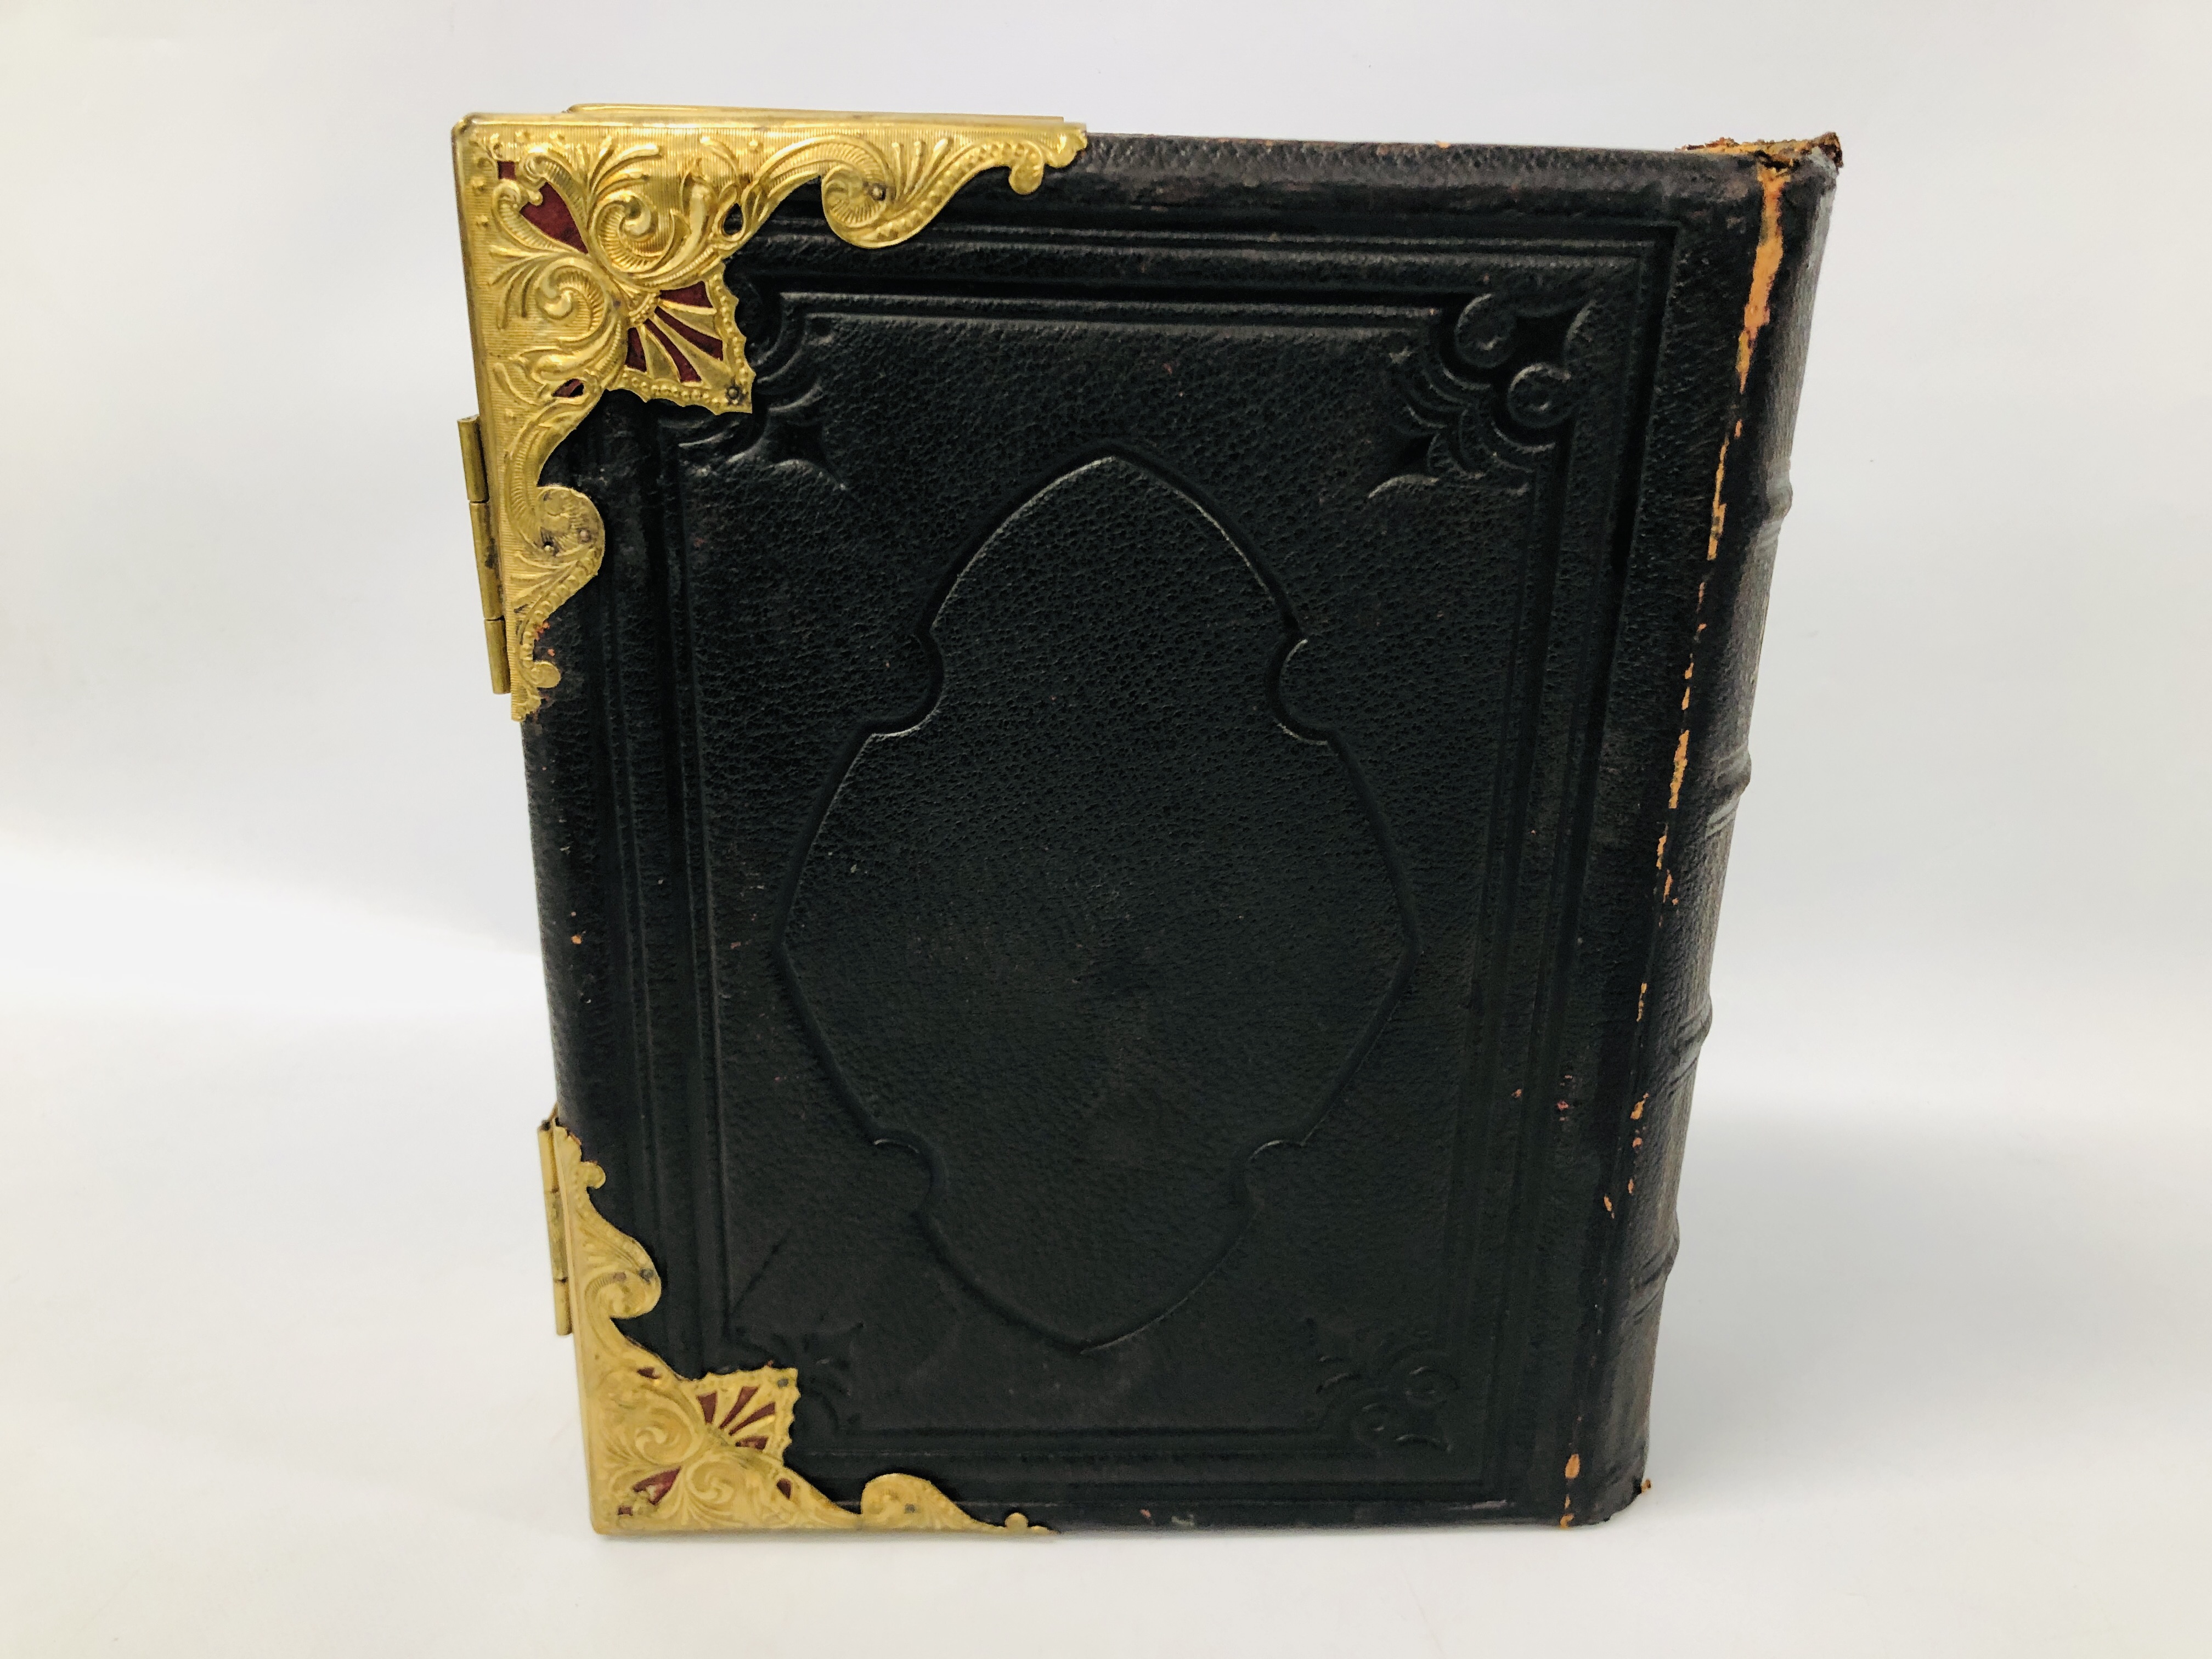 ANTIQUE LEATHER BOUND HOLY BIBLE WITH BRASS BANDING - Image 5 of 6